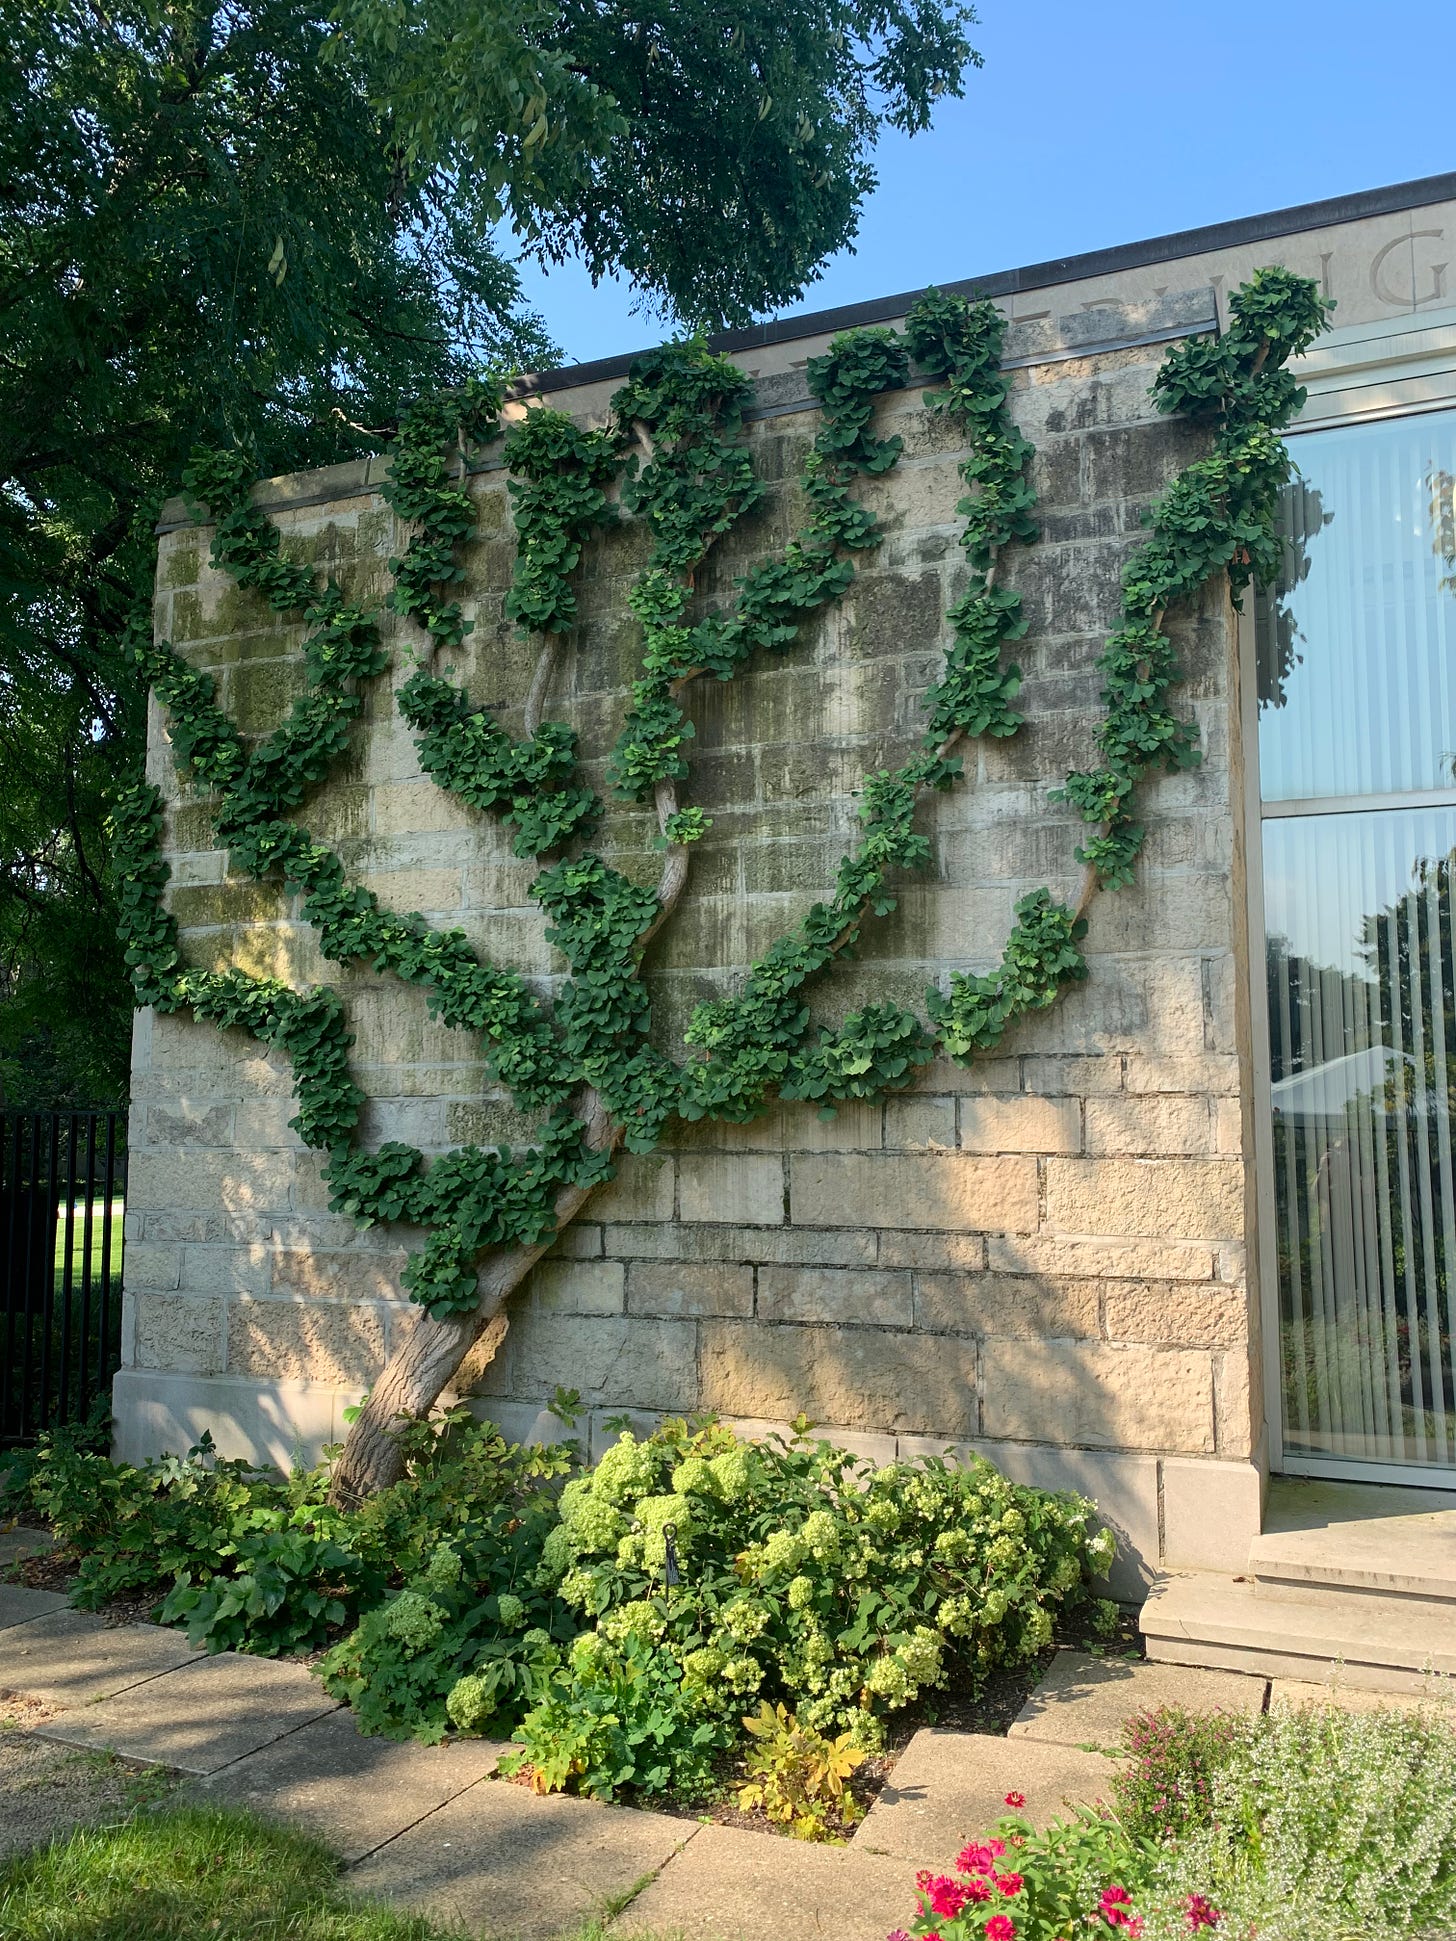 Espalier of Gingko biloba climbing with green leafed branches up the stone wall of the library building.